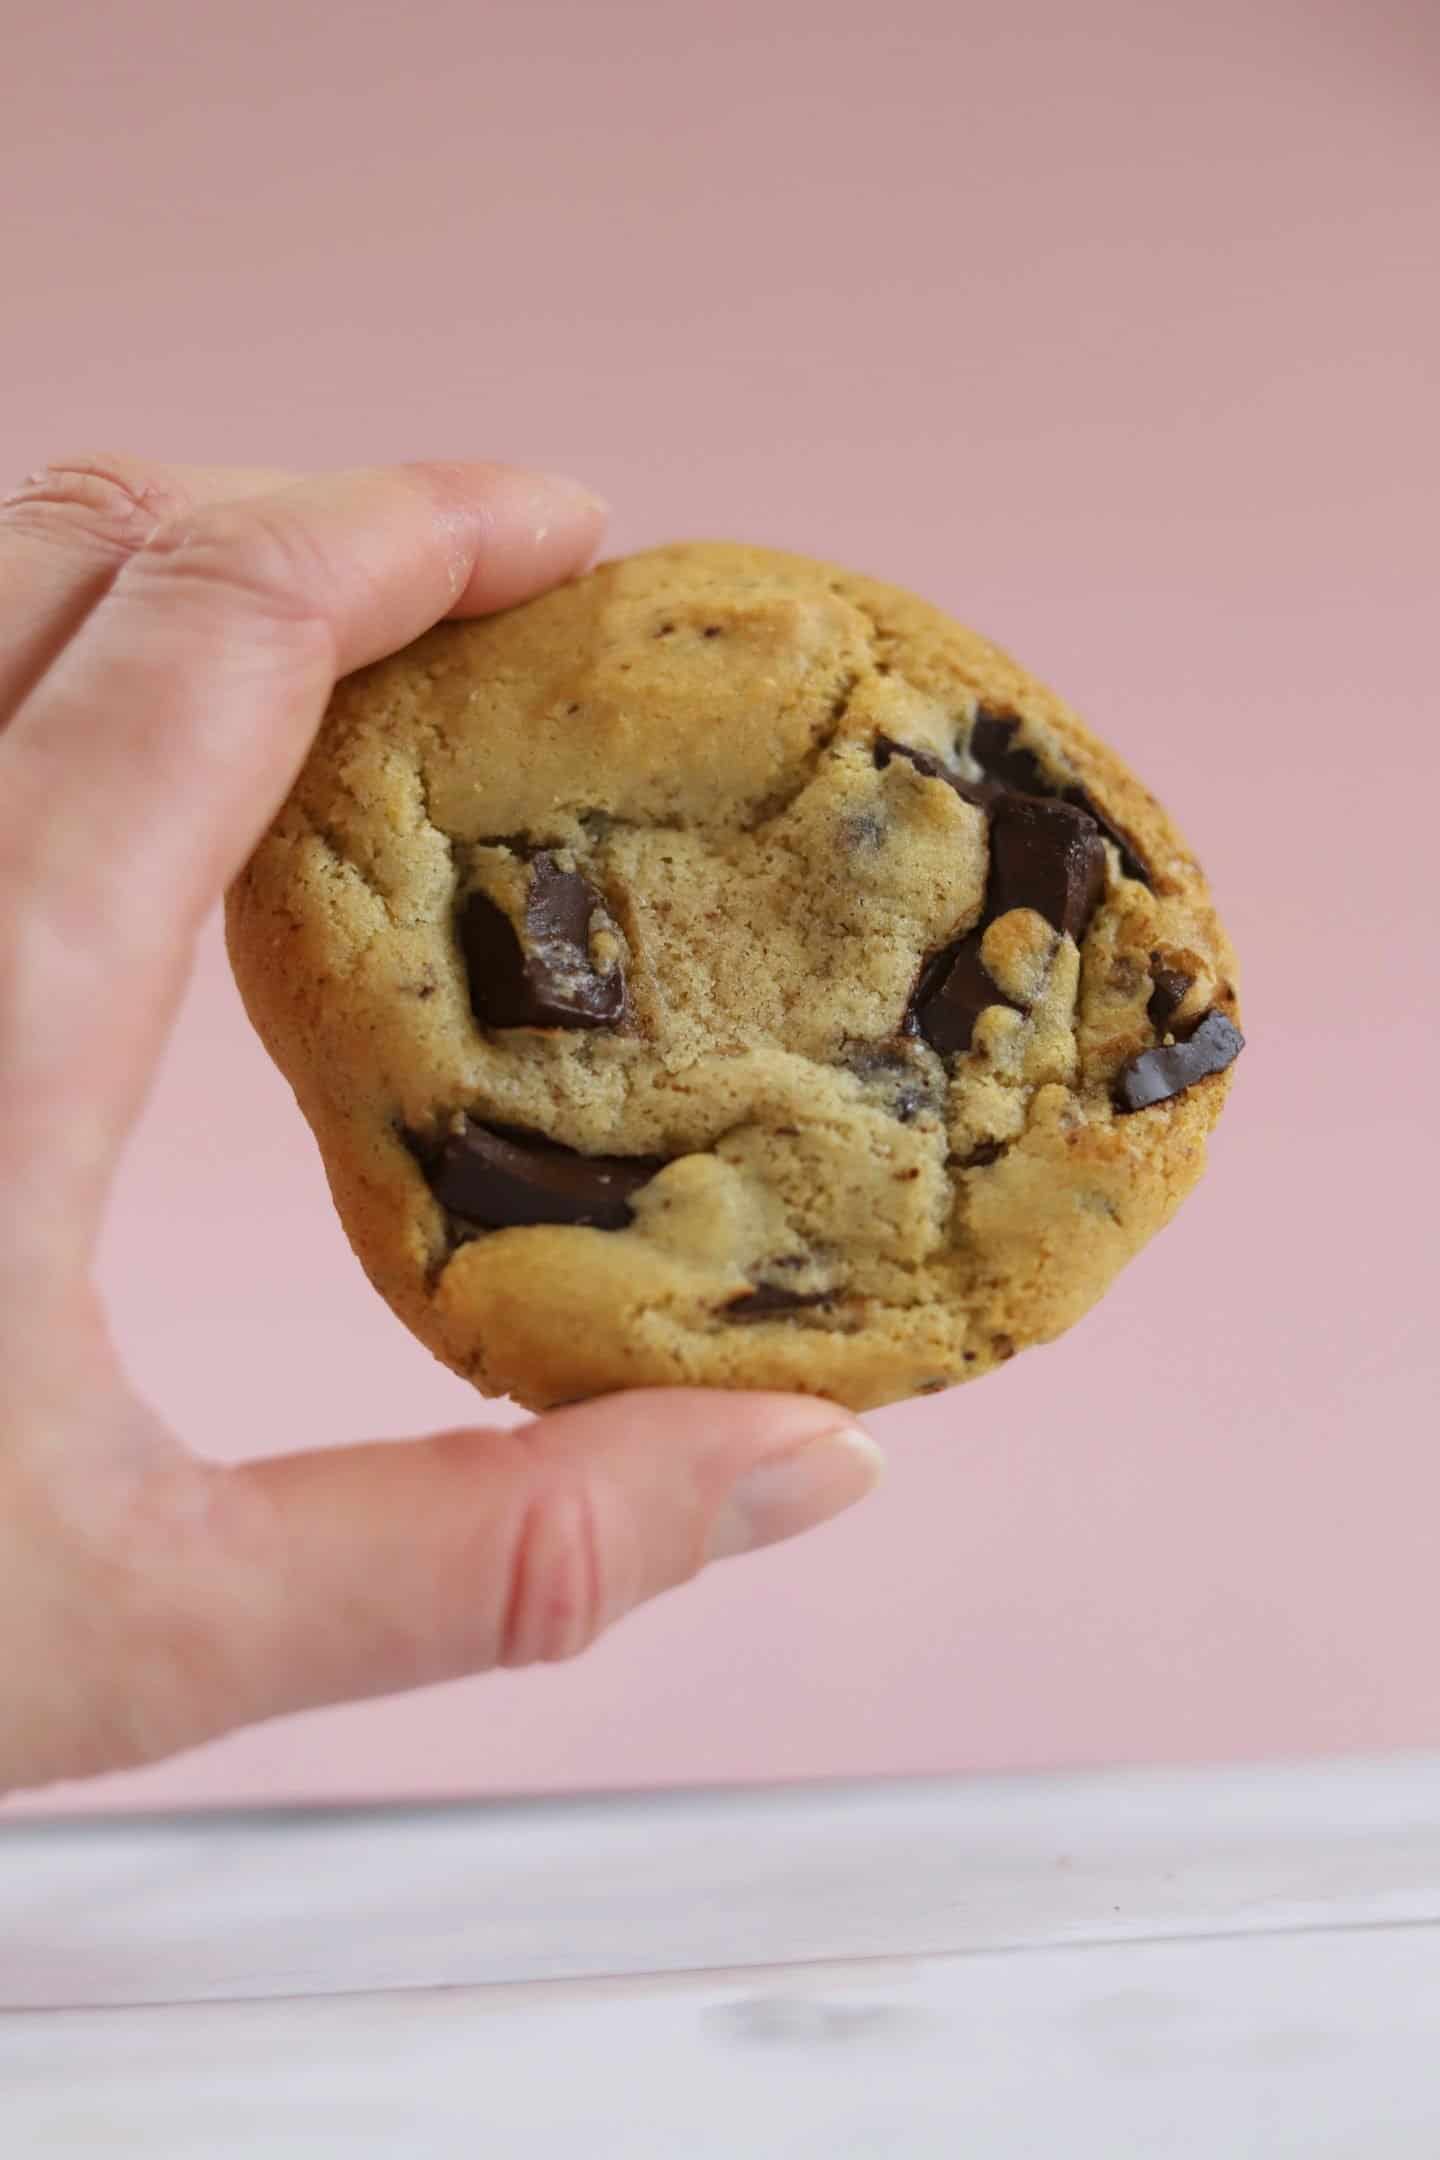 Hand holding a vegan chocolate chip cookie.